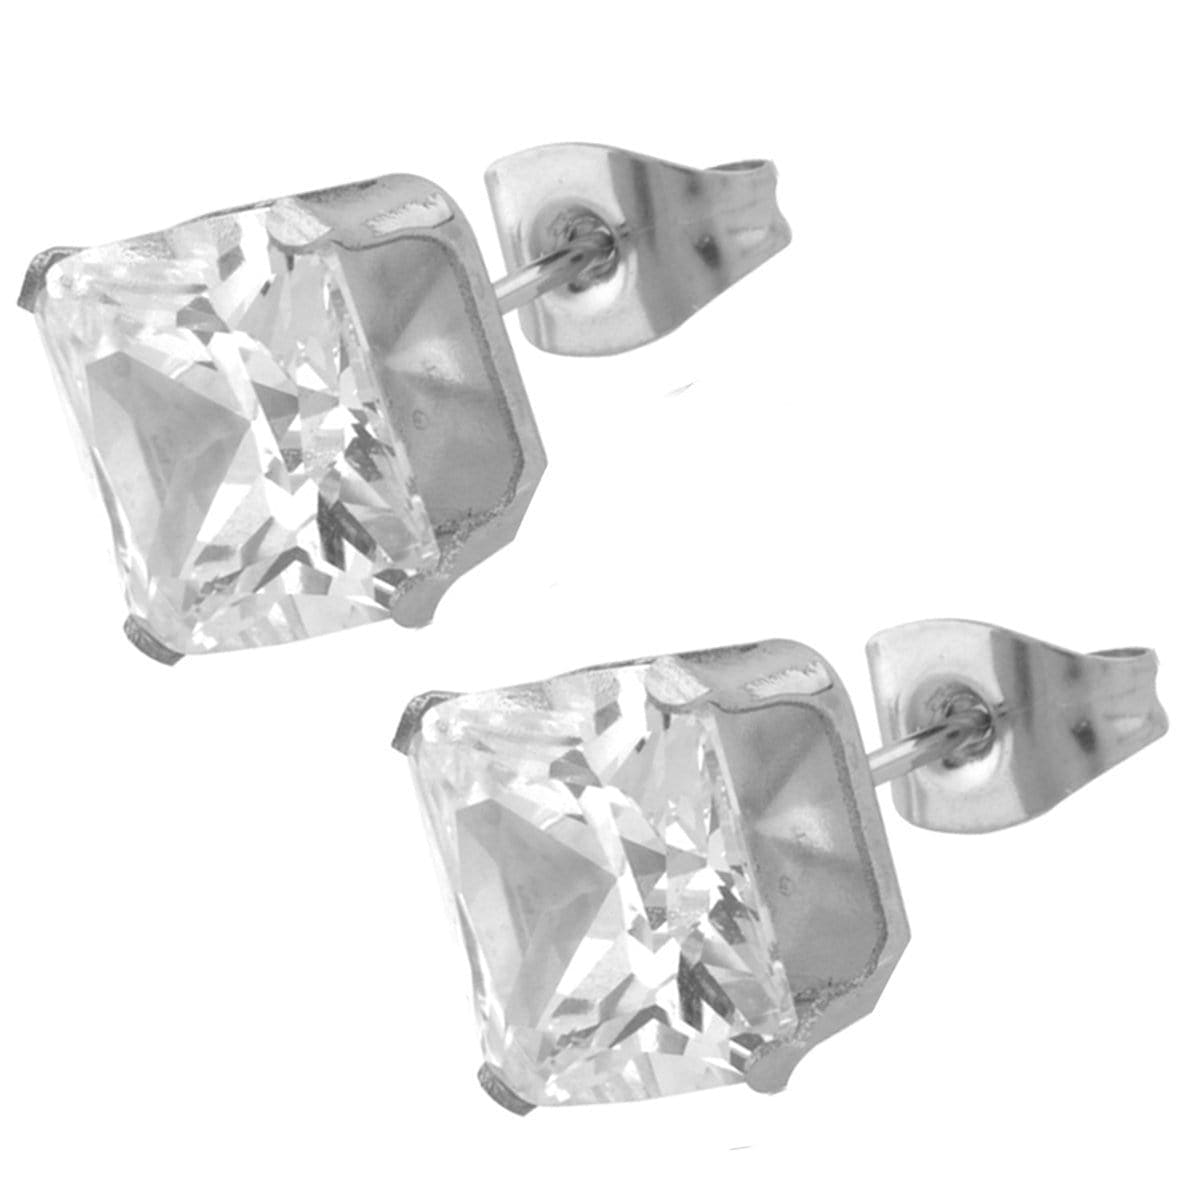 INOX JEWELRY Earrings Silver Tone Stainless Steel Square Cut CZ Studs